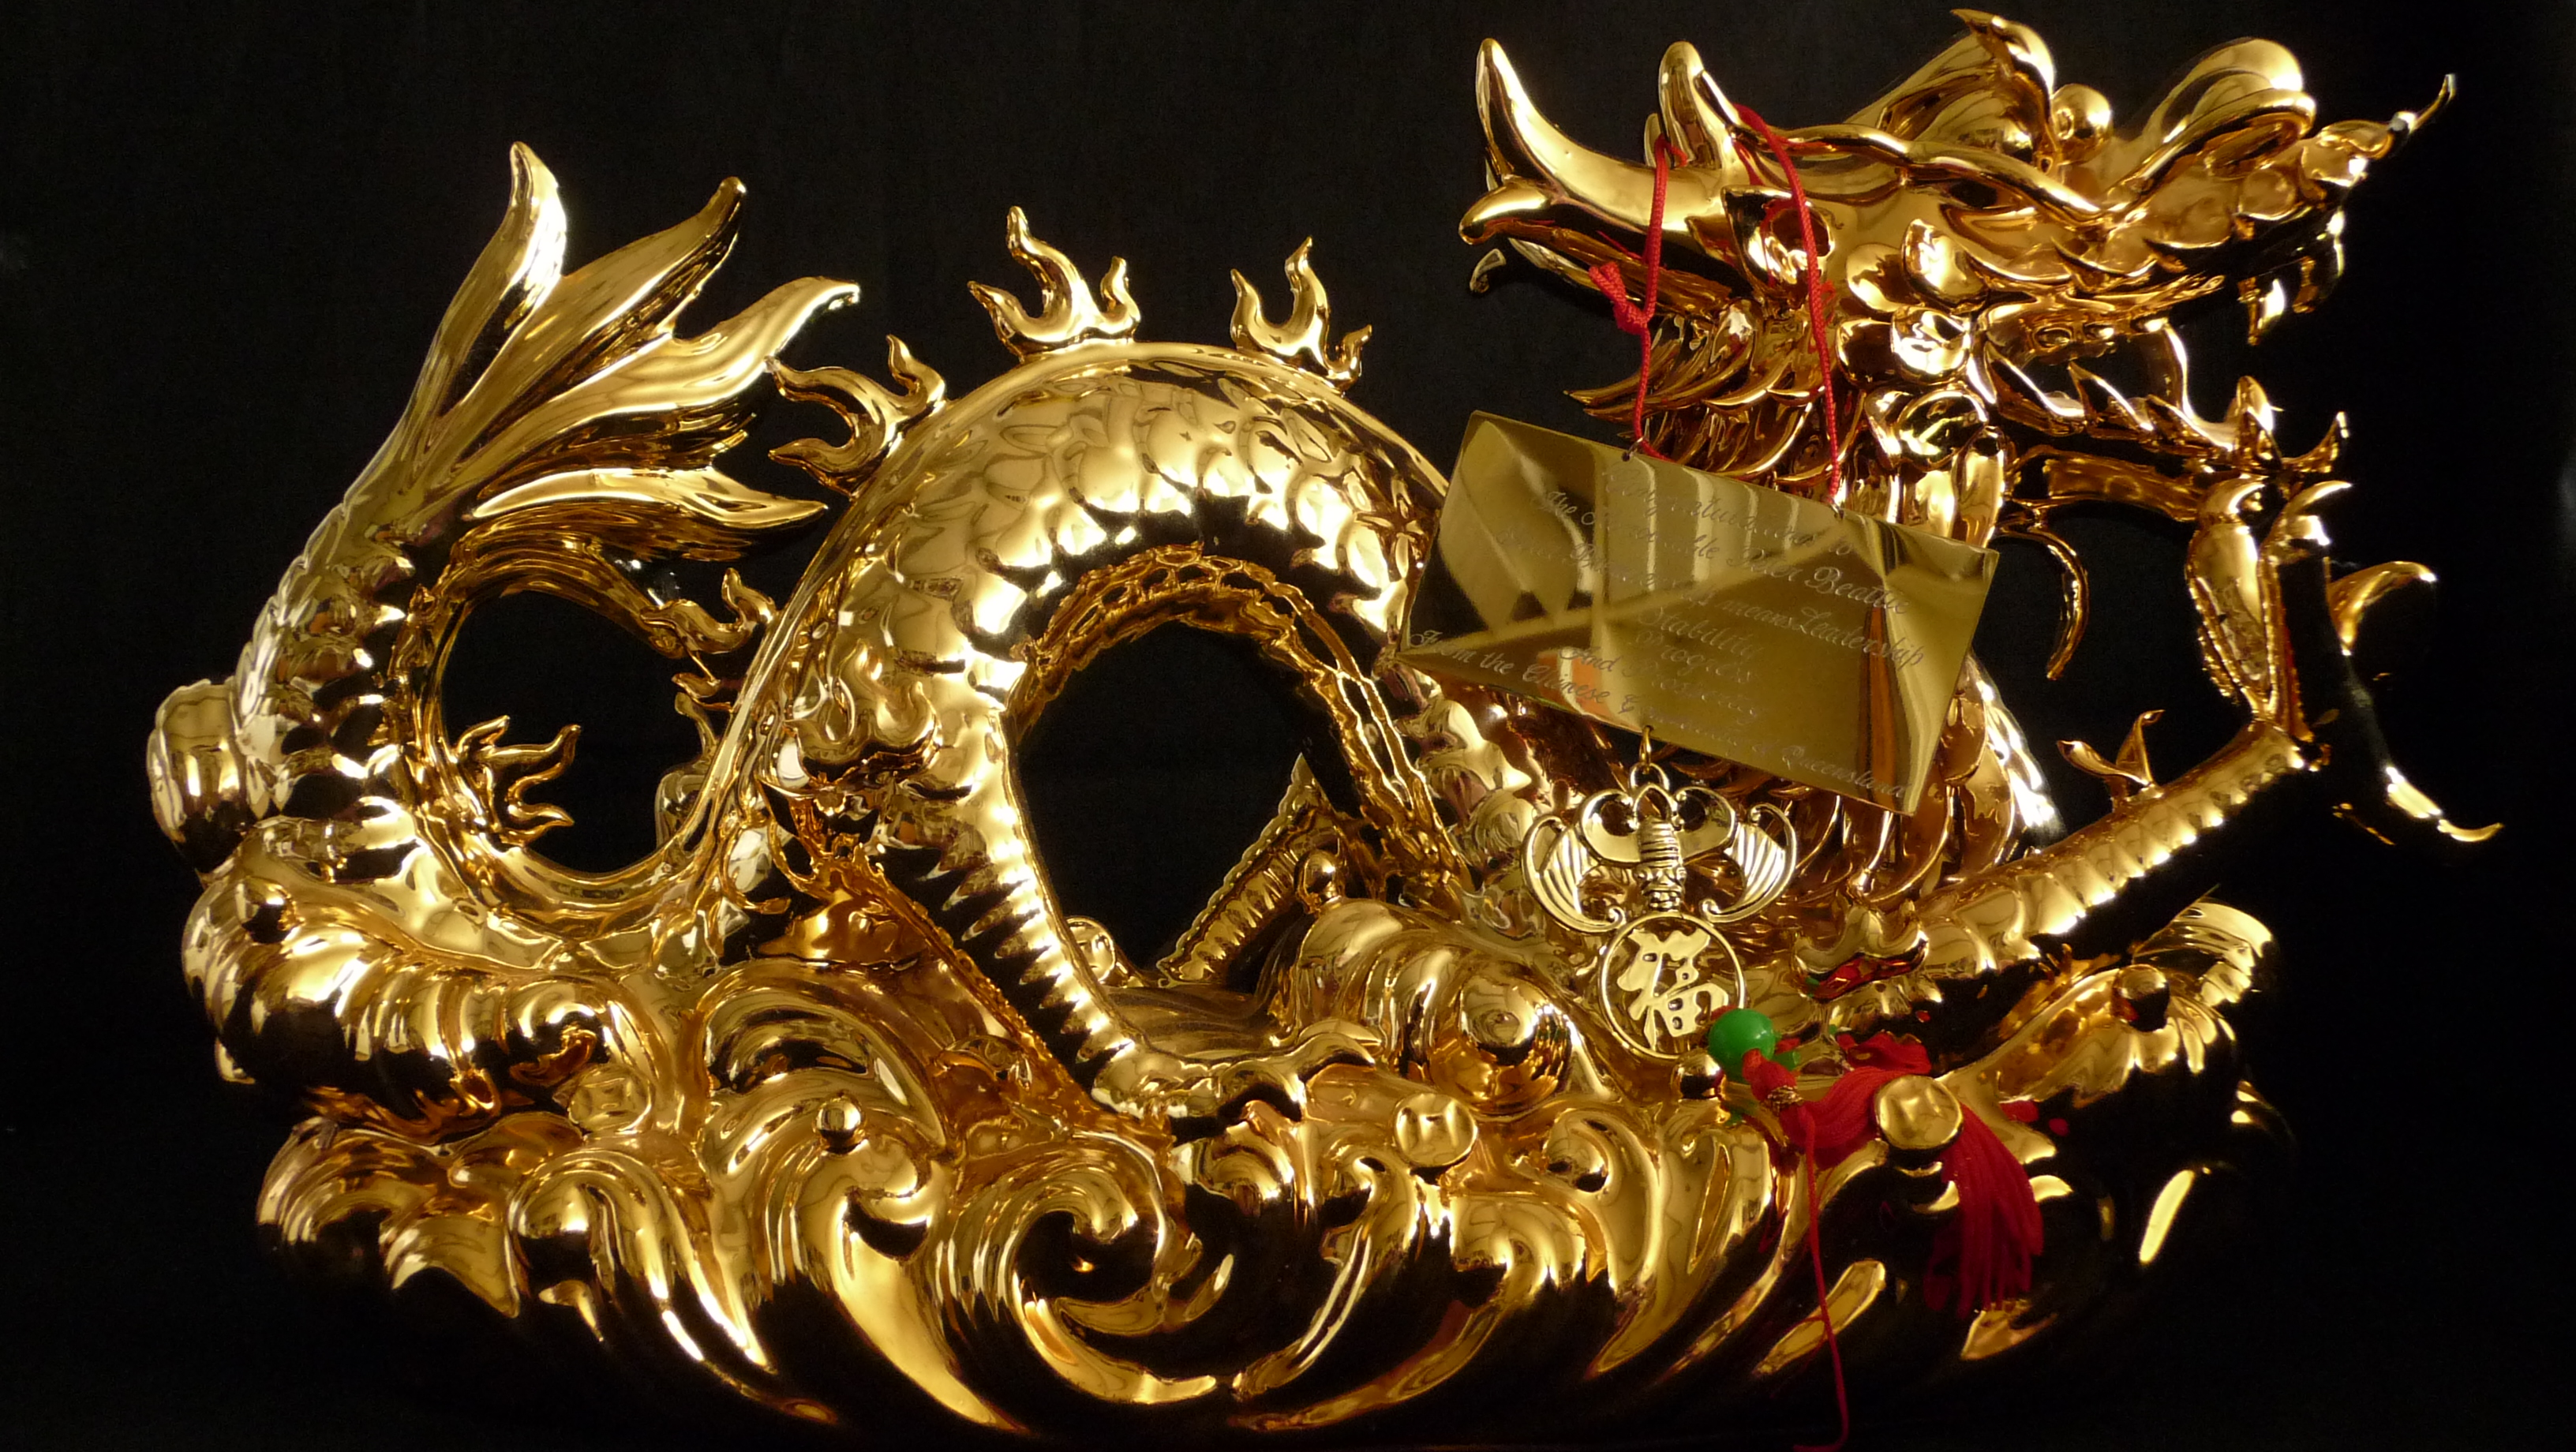 File:Chinese Dragon QM-r - Wikimedia Commons